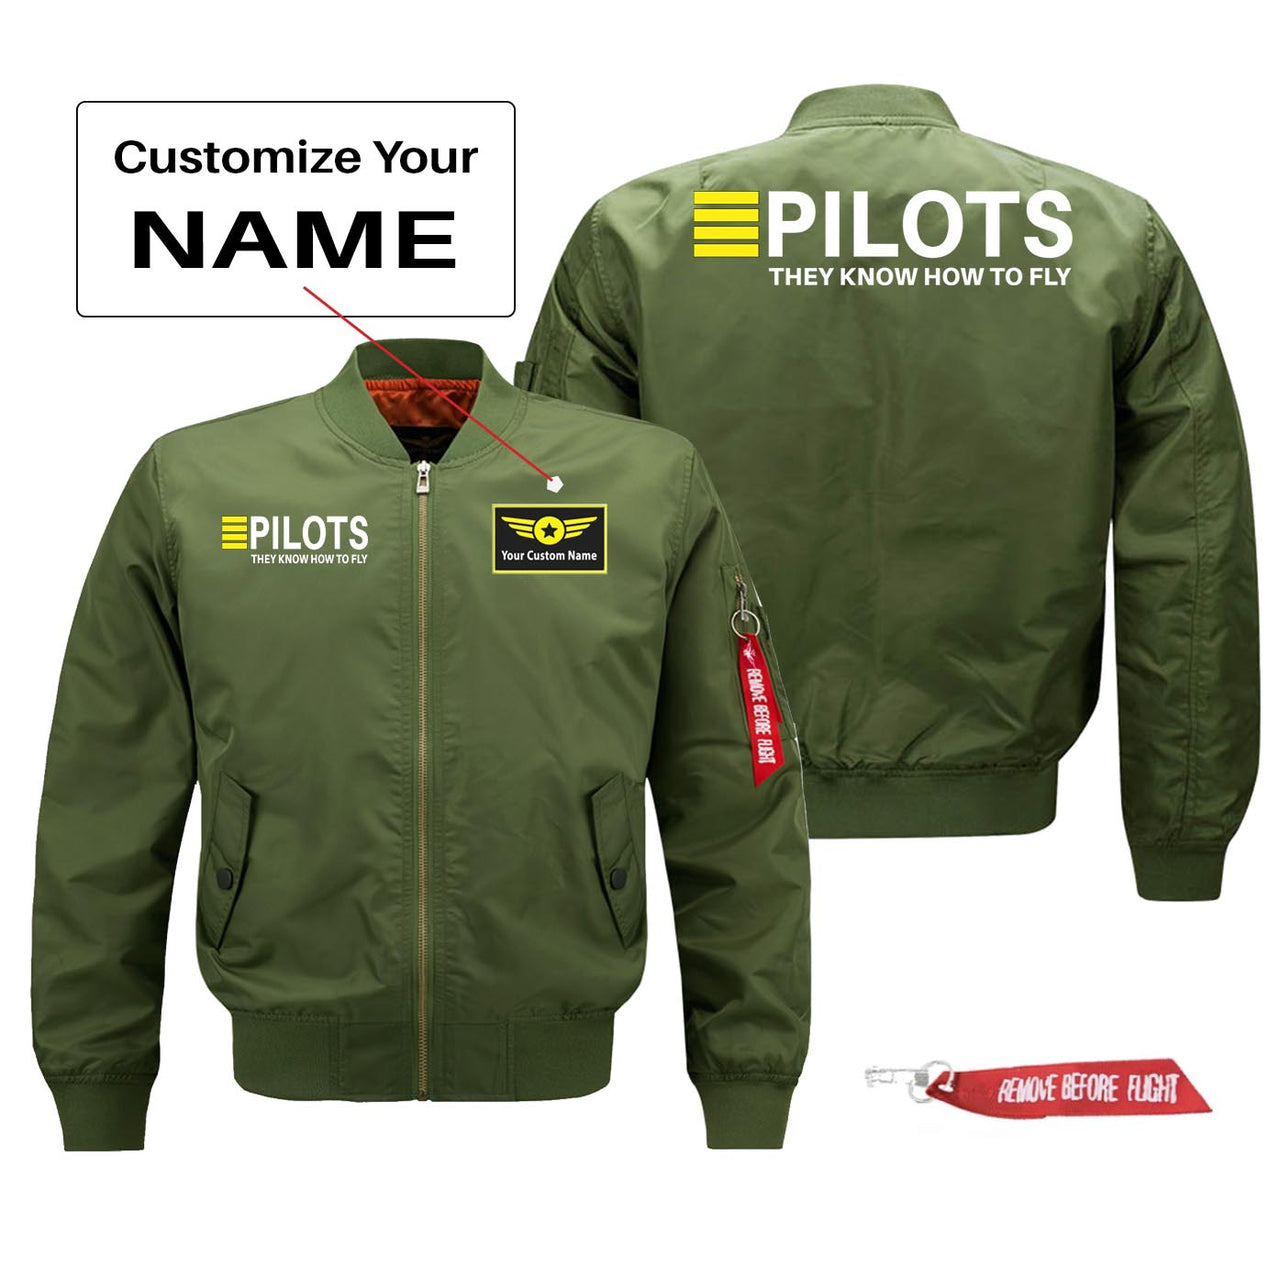 PILOTS They Know How To Fly Designed Pilot Jackets (Customizable)